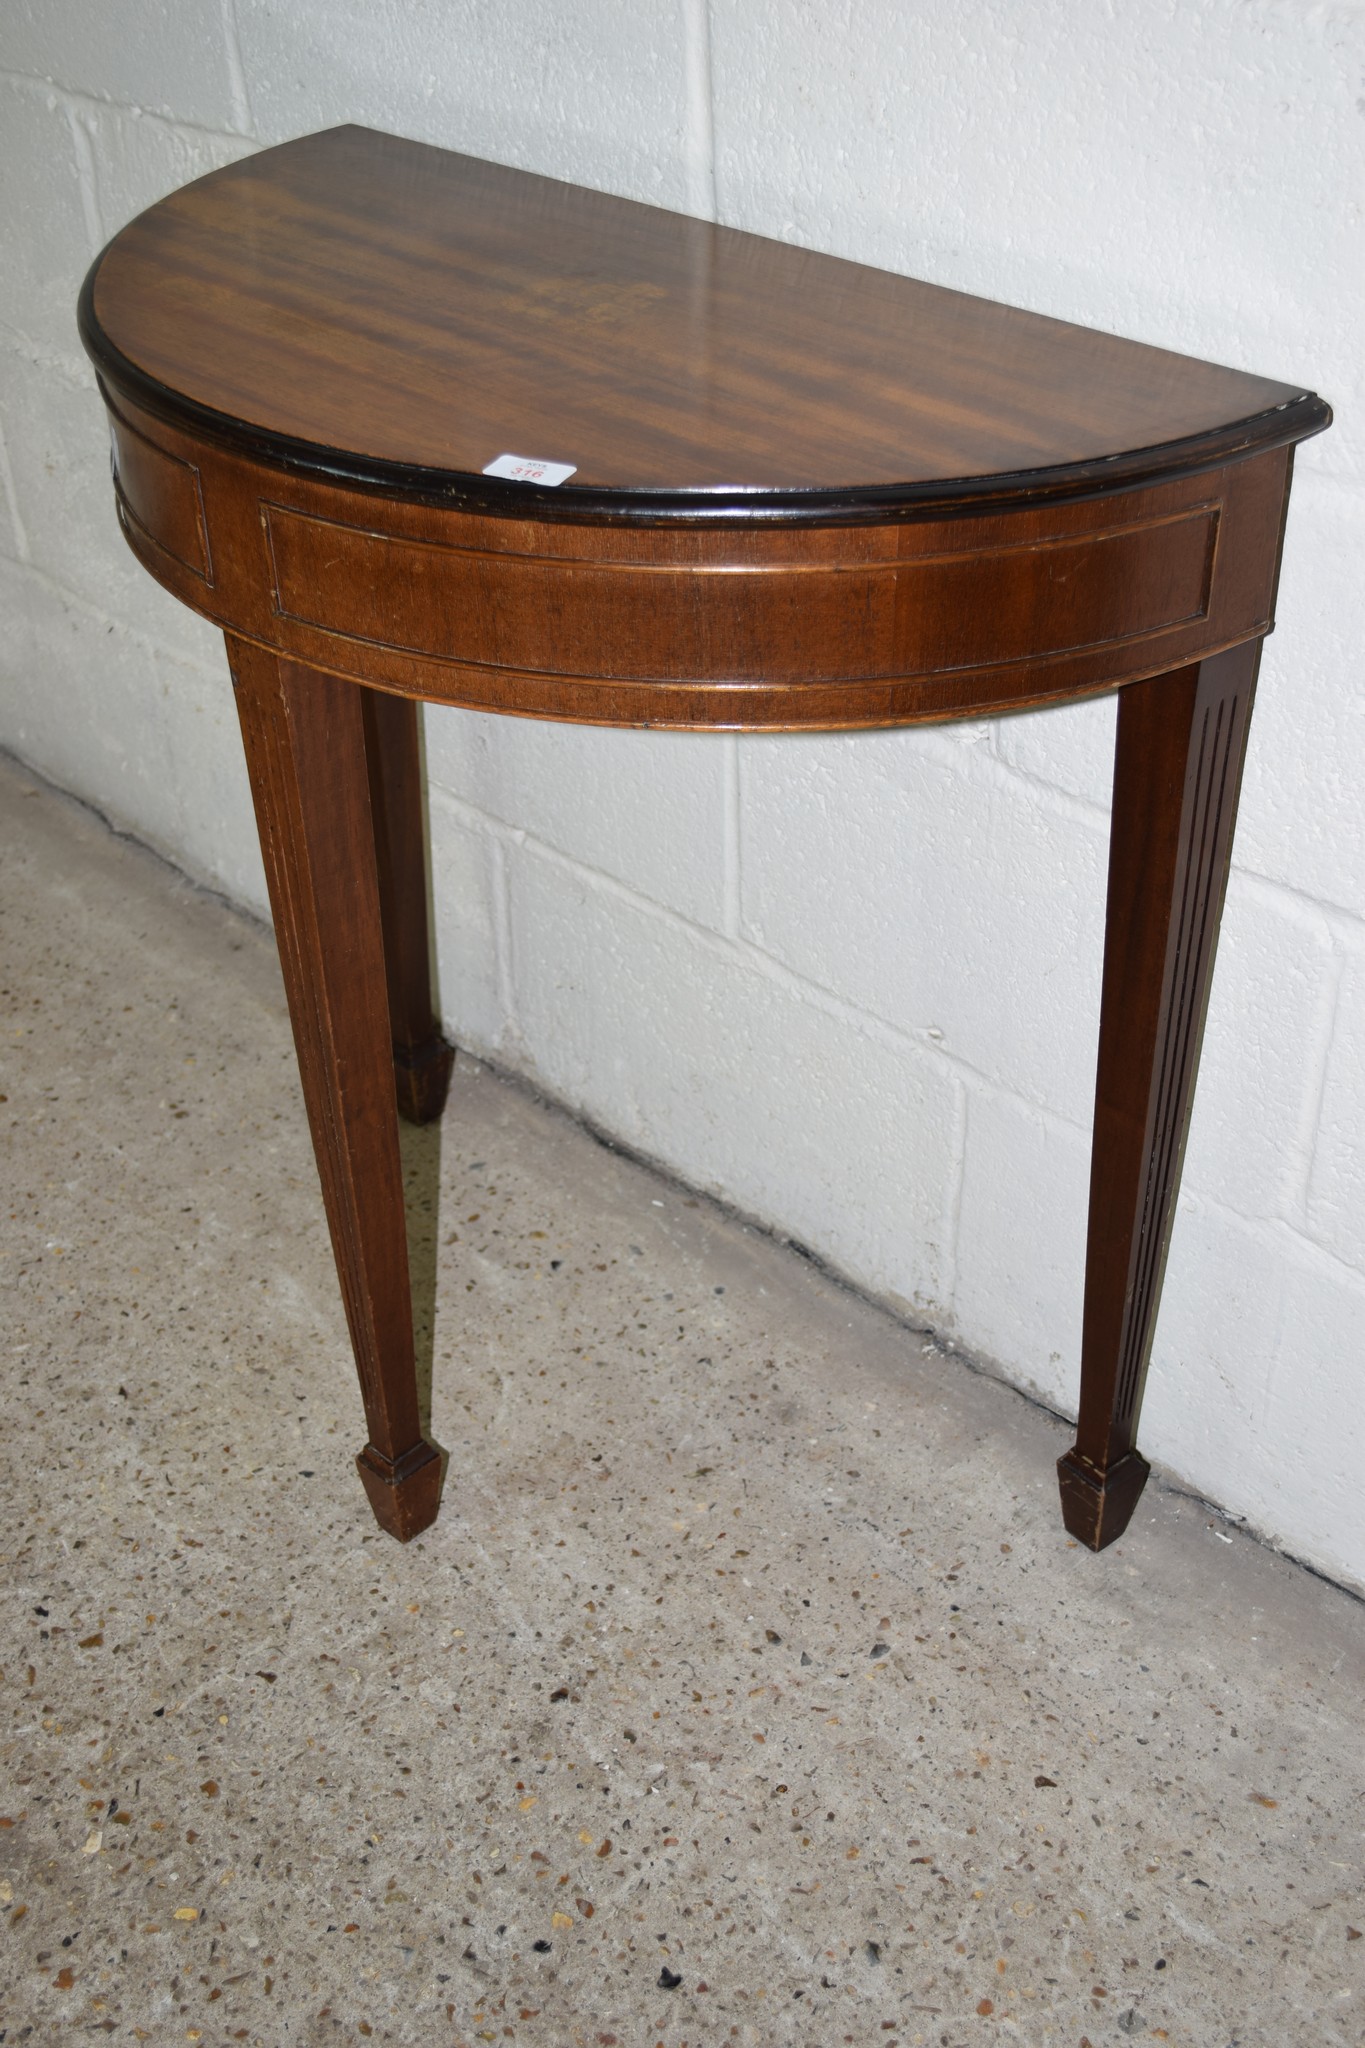 REPRODUCTION STAINED WOOD DEMI-LUNE TABLE, WIDTH APPROX 74CM - Image 2 of 2